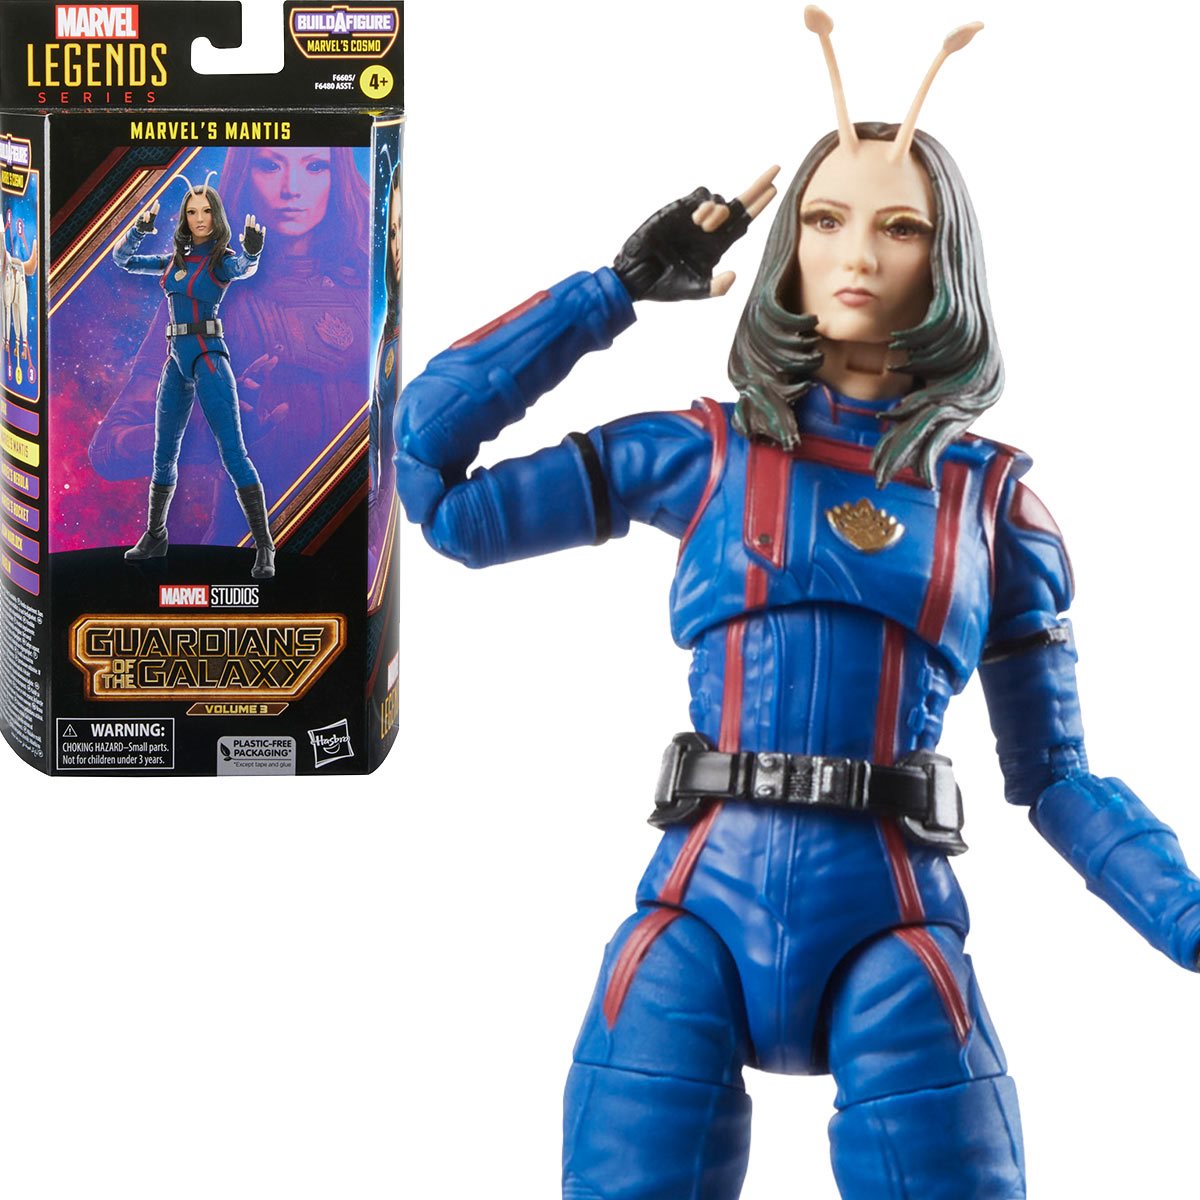 Guardians of the Galaxy Vol. 3 Marvel Legends Mantis 6-Inch Action